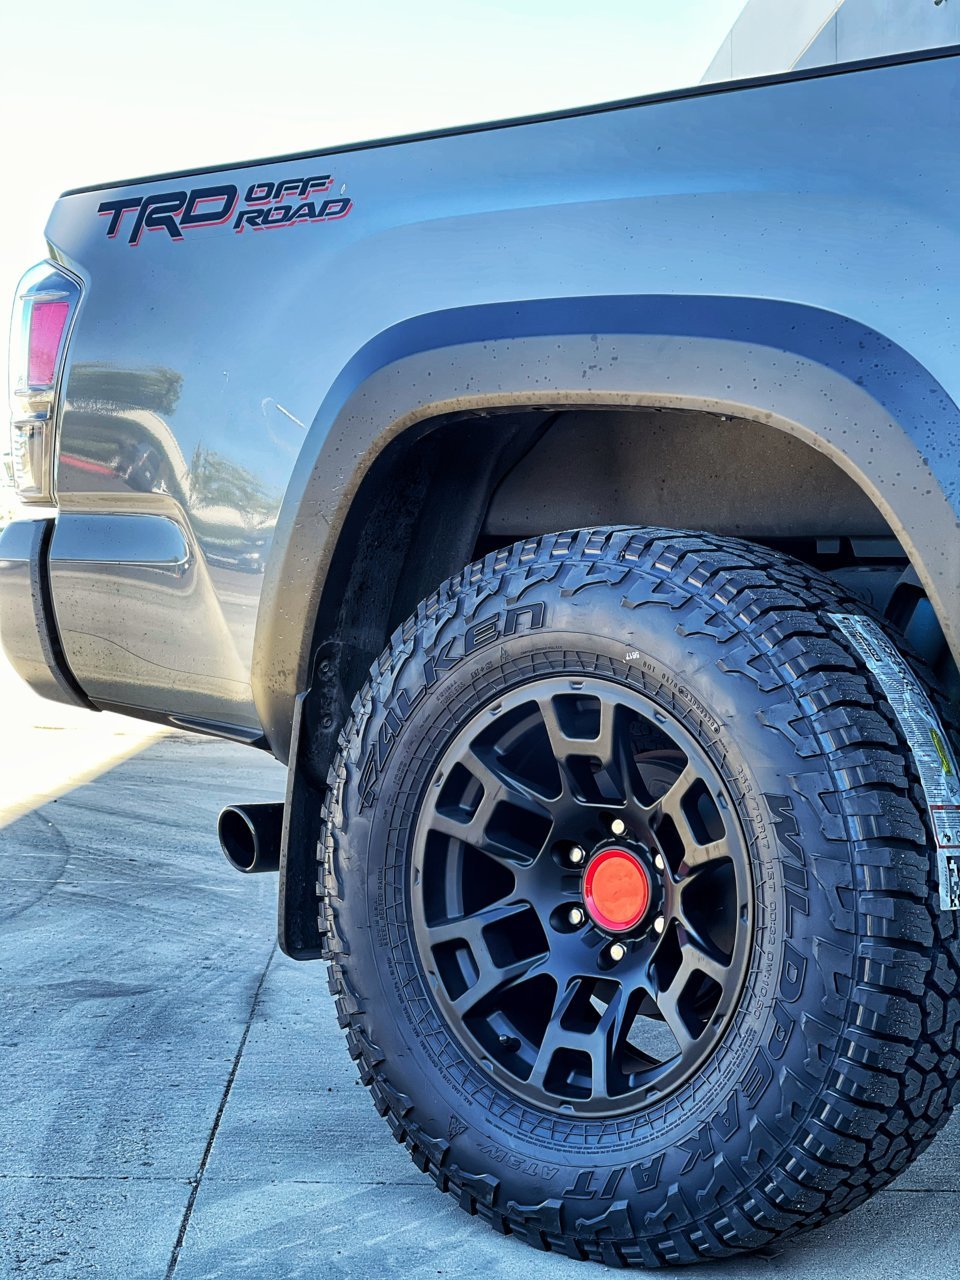 2021 4runner Trd Pro Replica Wheels Page 7 Tacoma World